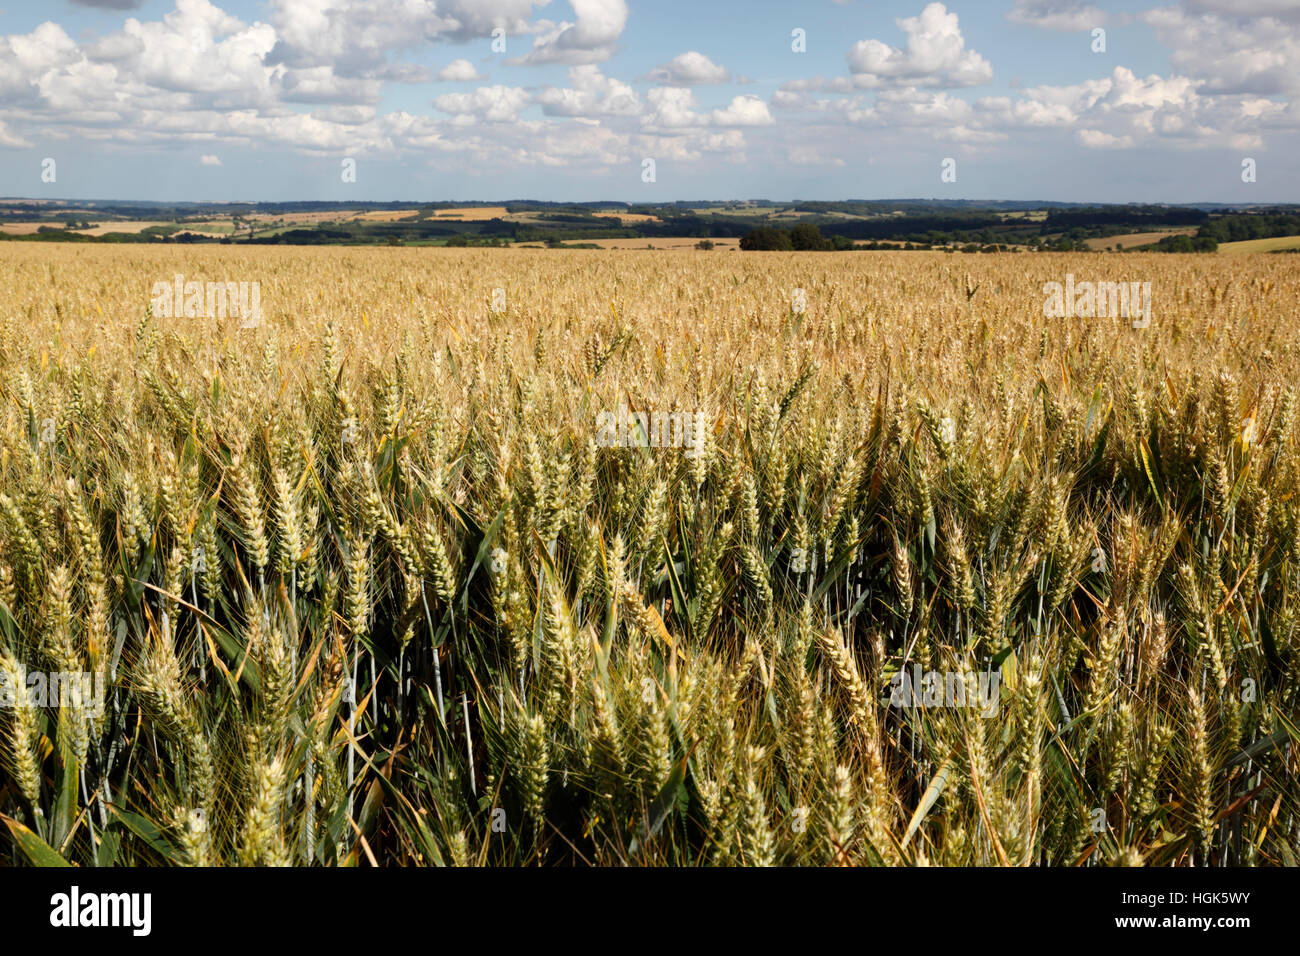 Triticale (hybrid of wheat and rye) ripening in field, Gloucestershire, England, United Kingdom, Europe Stock Photo